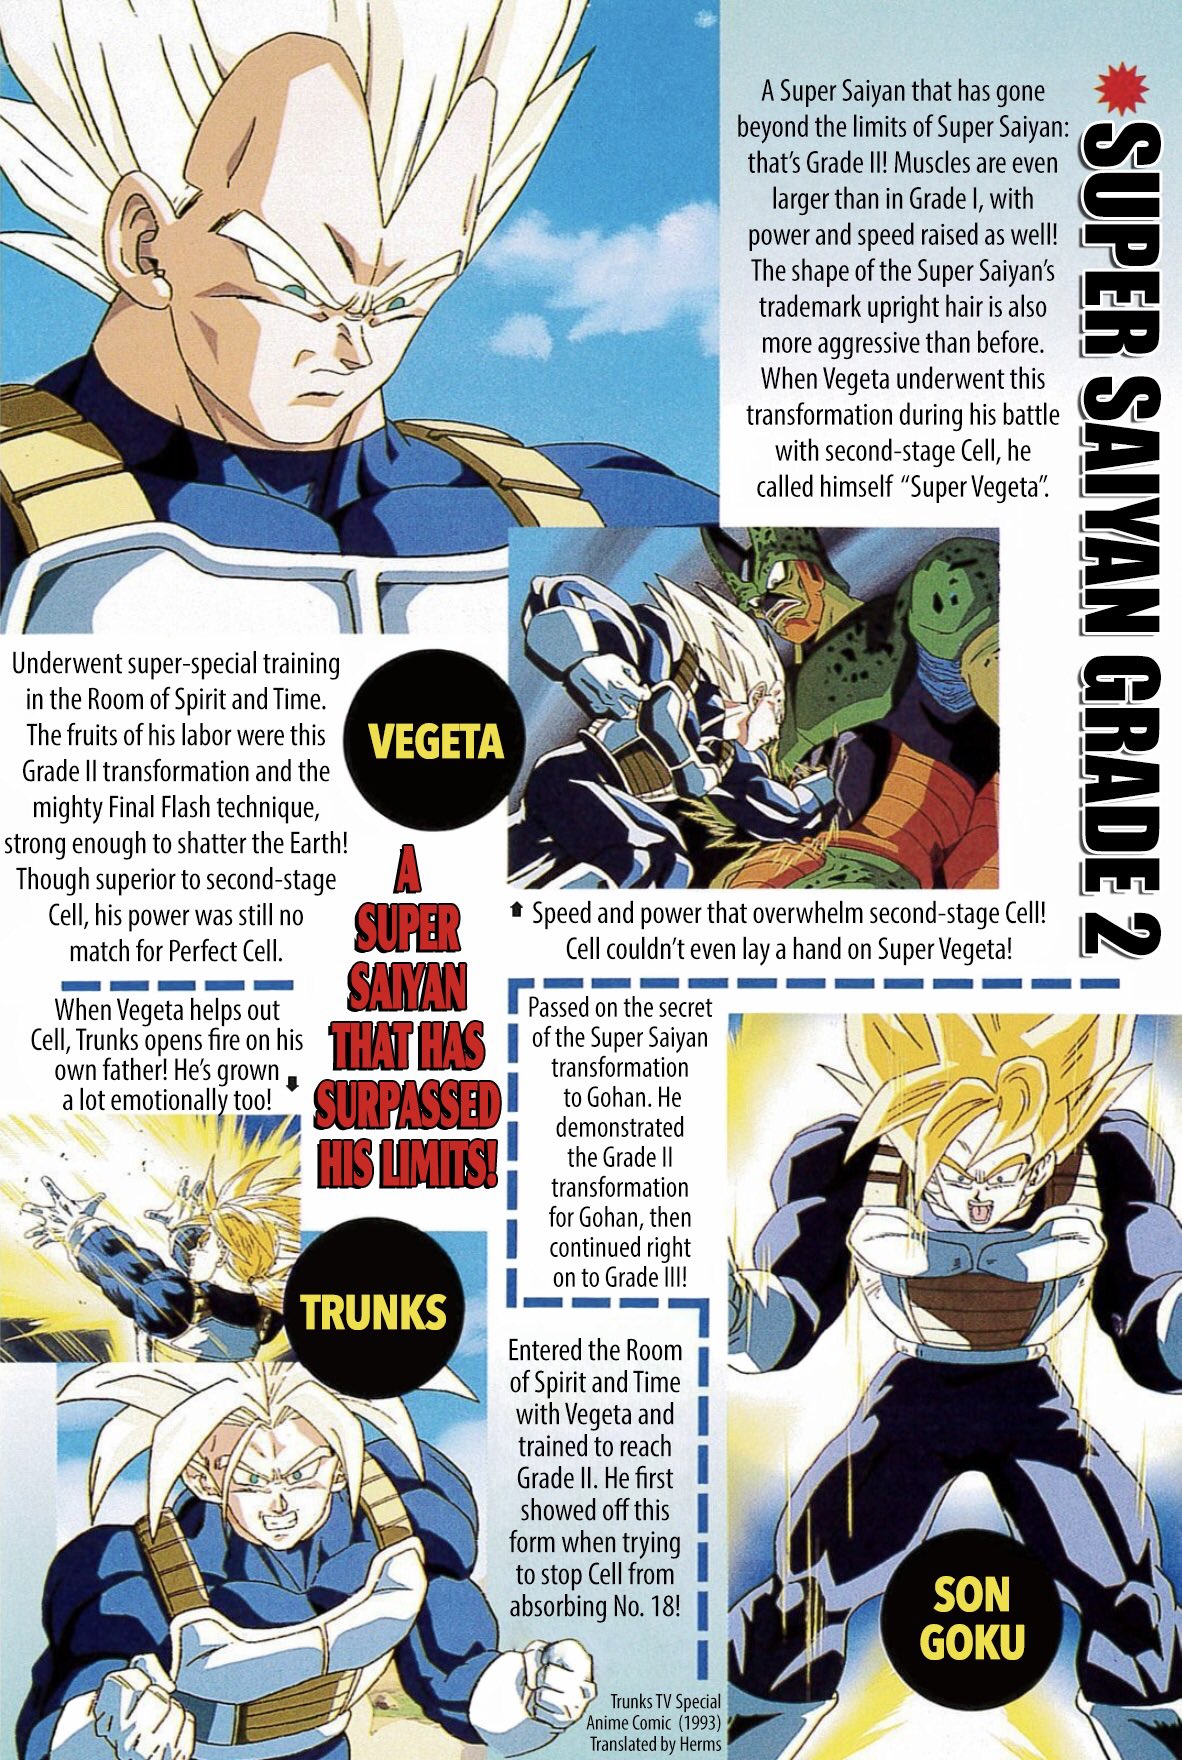 Can Vegeta's (all forms) final flash overpower Goku (all forms